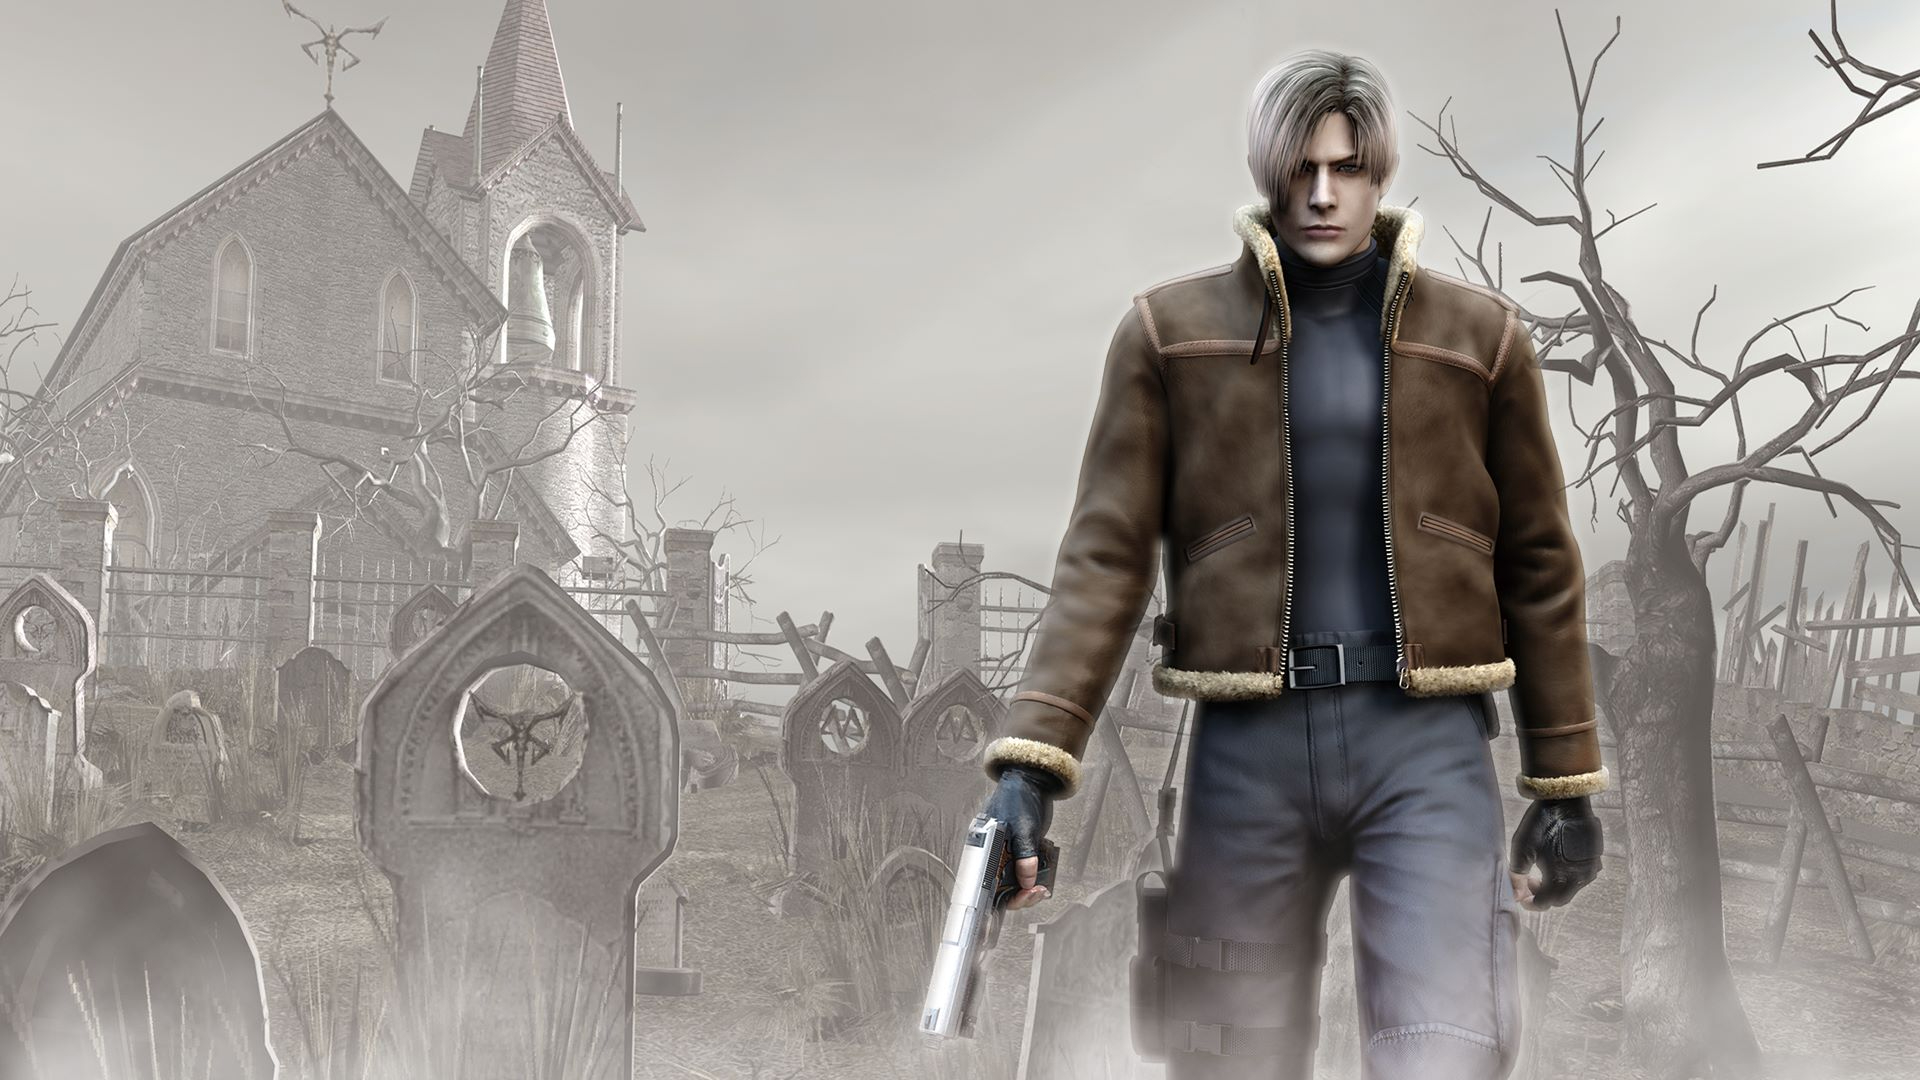 10 games like Resident Evil to scare you silly